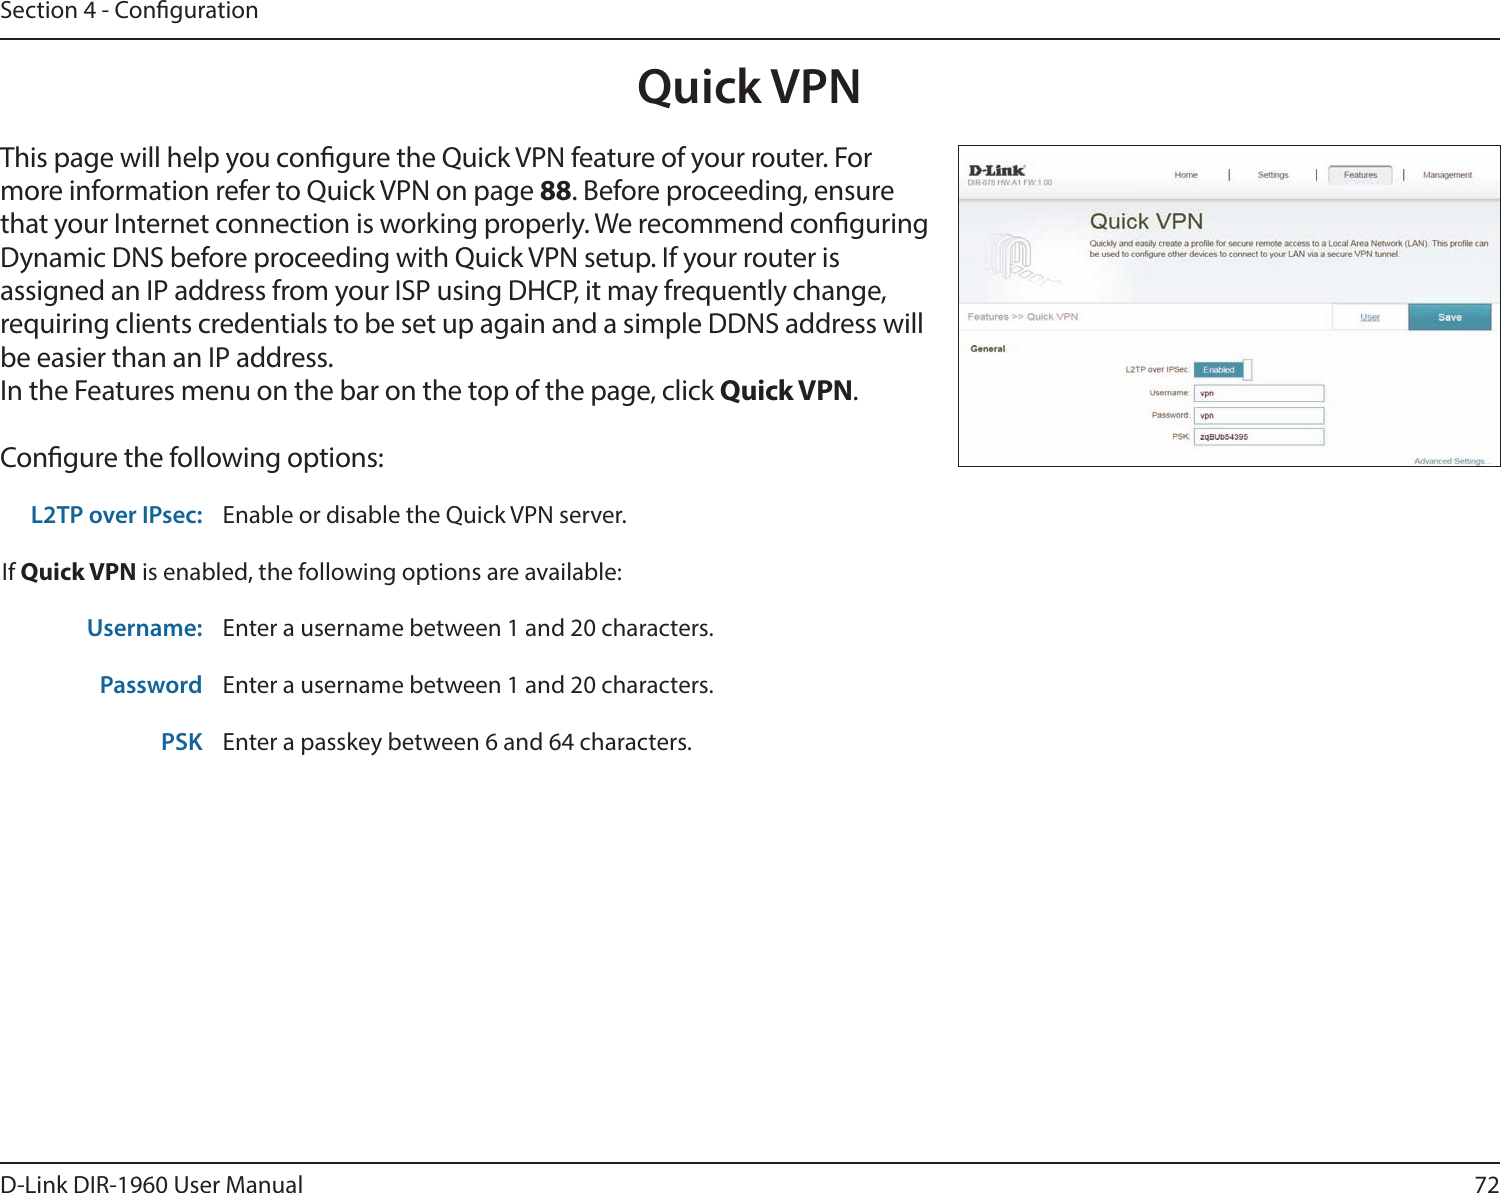 72D-Link DIR-1960 User ManualSection 4 - CongurationQuick VPNThis page will help you congure the Quick VPN feature of your router. For more information refer to Quick VPN on page 88. Before proceeding, ensure that your Internet connection is working properly. We recommend conguring Dynamic DNS before proceeding with Quick VPN setup. If your router is assigned an IP address from your ISP using DHCP, it may frequently change, requiring clients credentials to be set up again and a simple DDNS address will be easier than an IP address.In the Features menu on the bar on the top of the page, click Quick VPN.Congure the following options:L2TP over IPsec: Enable or disable the Quick VPN server.If Quick VPN is enabled, the following options are available:Username: Enter a username between 1 and 20 characters.Password Enter a username between 1 and 20 characters.PSK Enter a passkey between 6 and 64 characters.